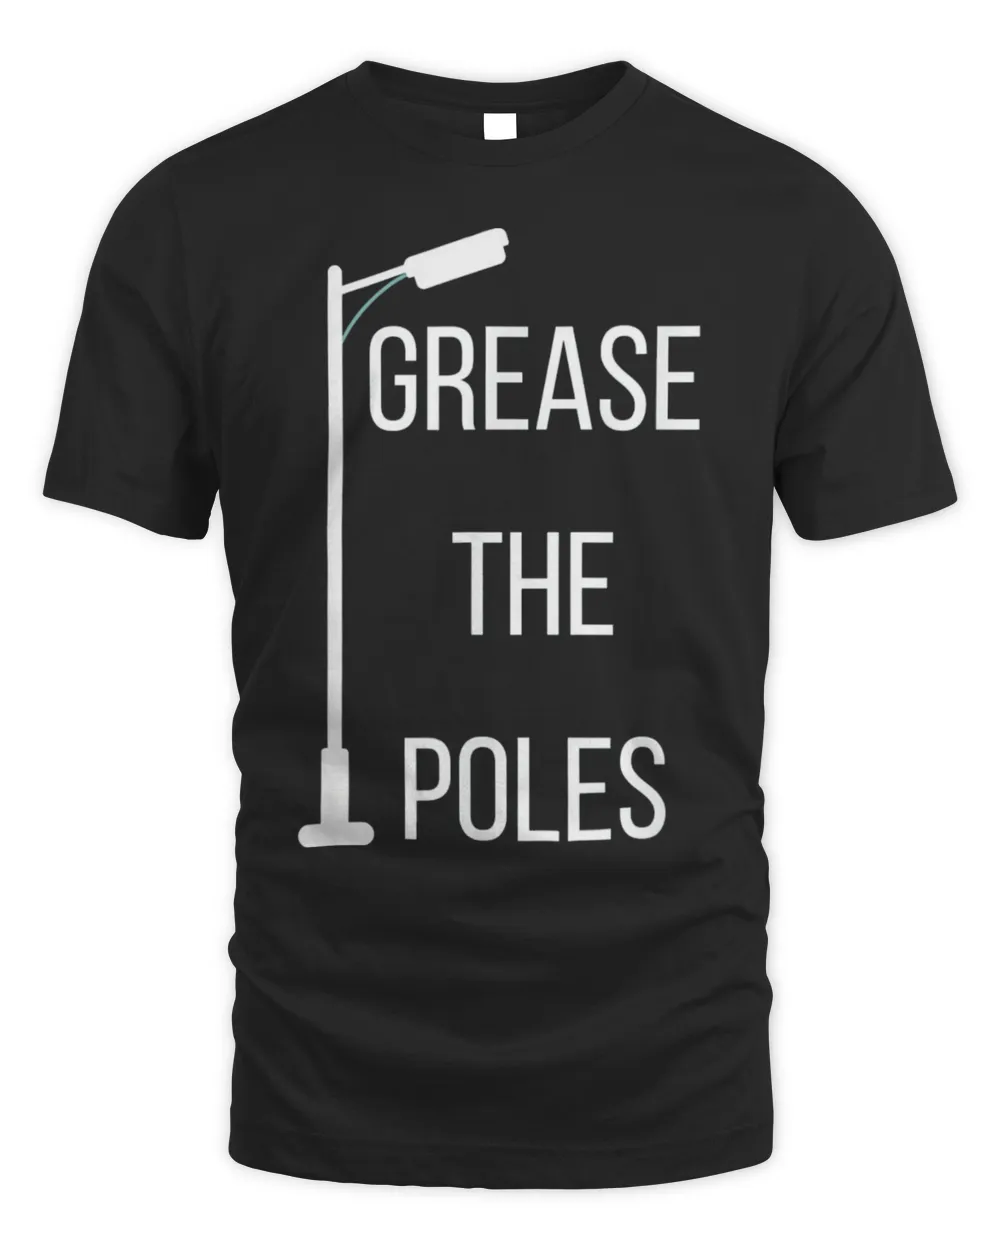 Grease the Poles T-Shirt